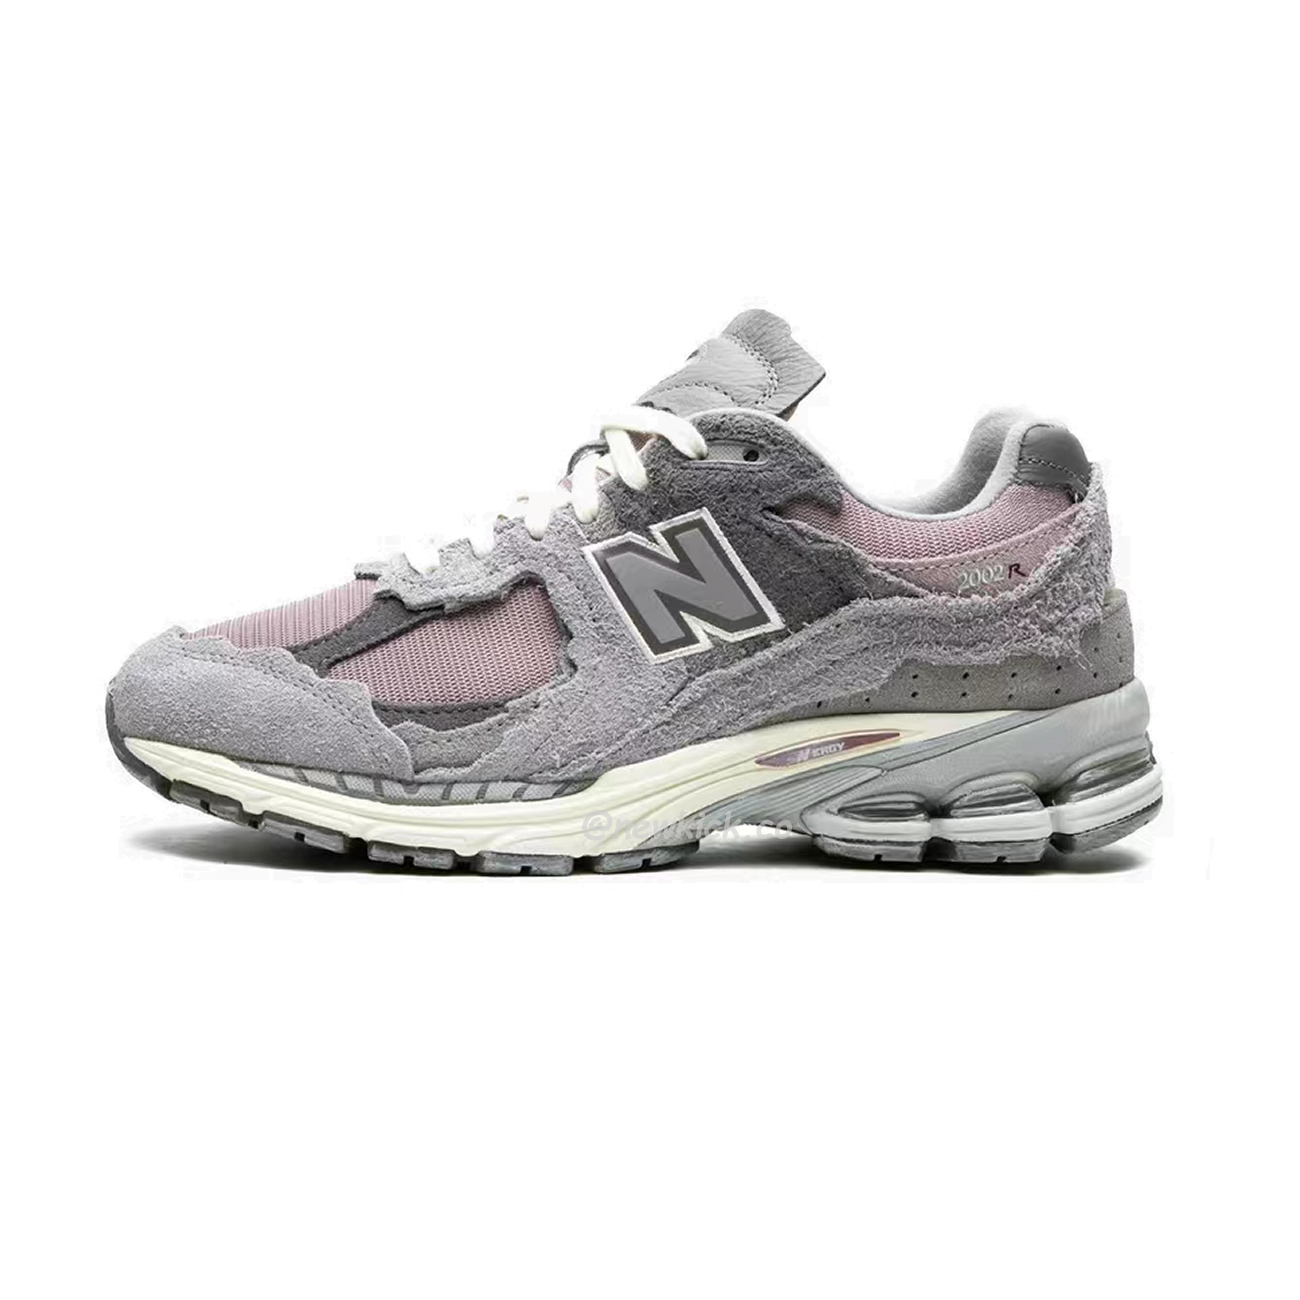 New Balance 2002r Protection Pack Lunar New Year Dusty Lilac M2002rdy (1) - newkick.org